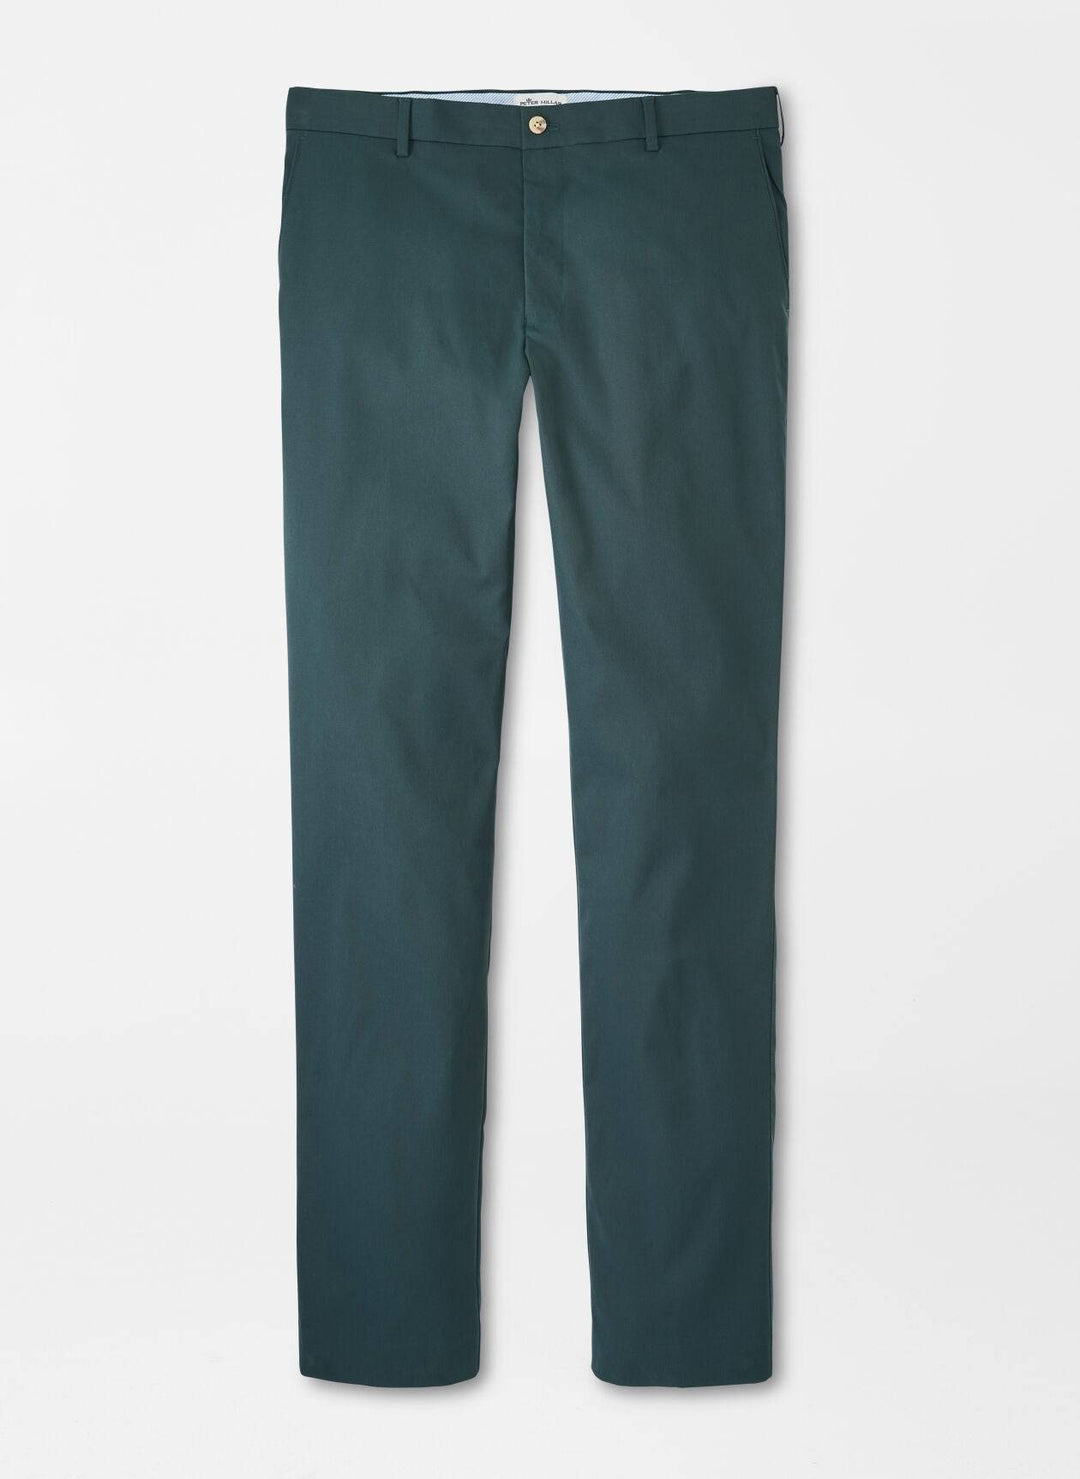 Raleigh Performance Trouser